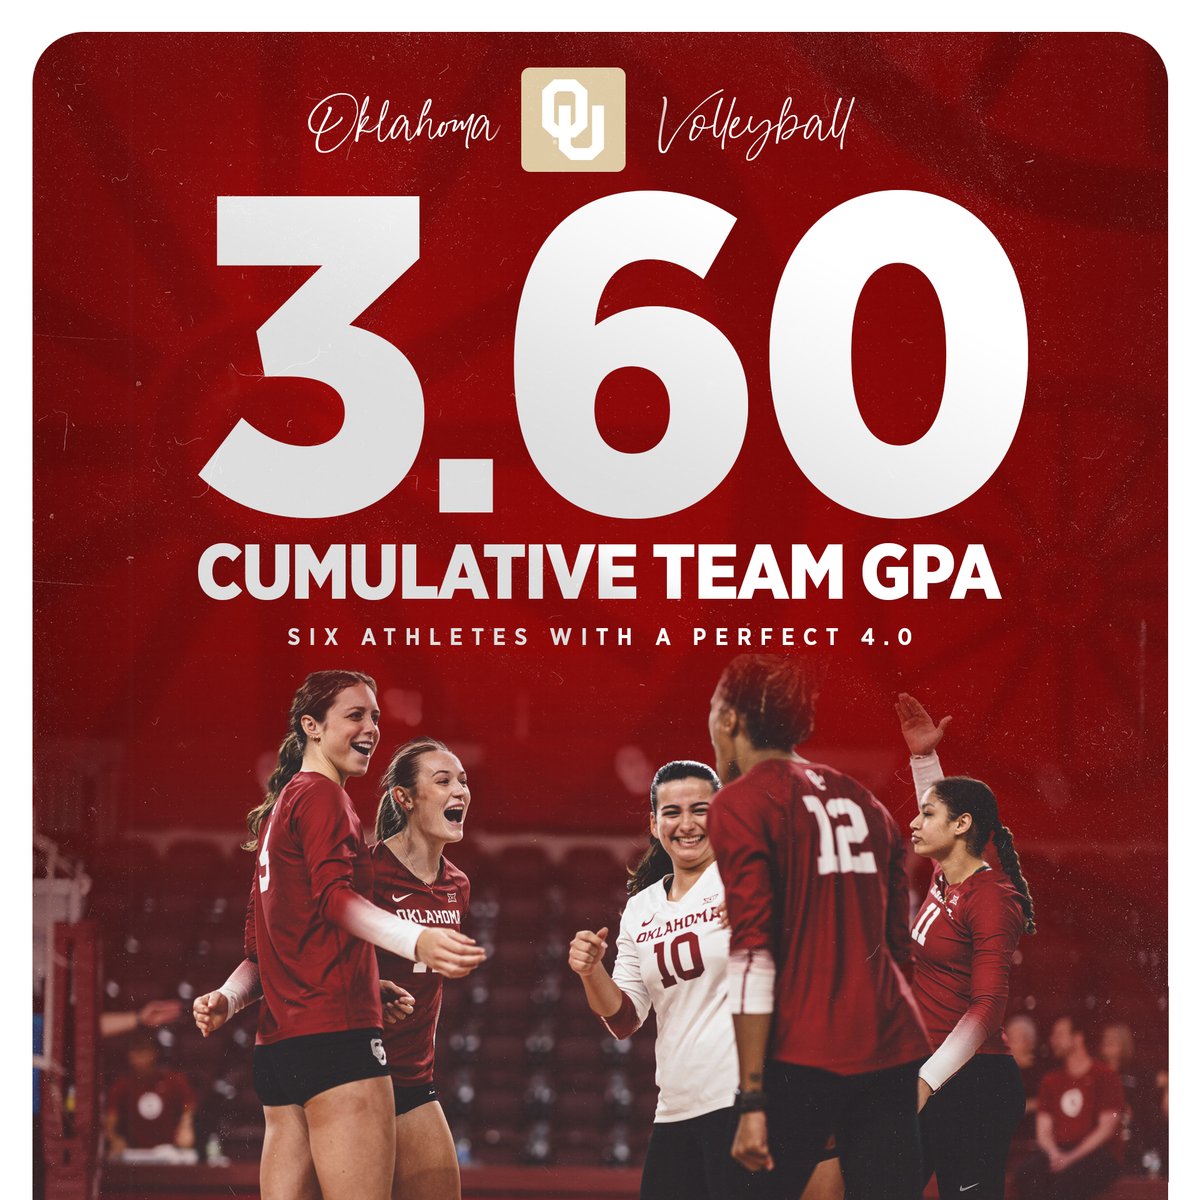 𝐆𝐨𝐭 𝐢𝐭 𝐝𝐨𝐧𝐞!   

The Sooners put in work this spring, earning a 3.60 team GPA, with 6⃣ student-athletes earning perfect 4.0s! 👏👏👏